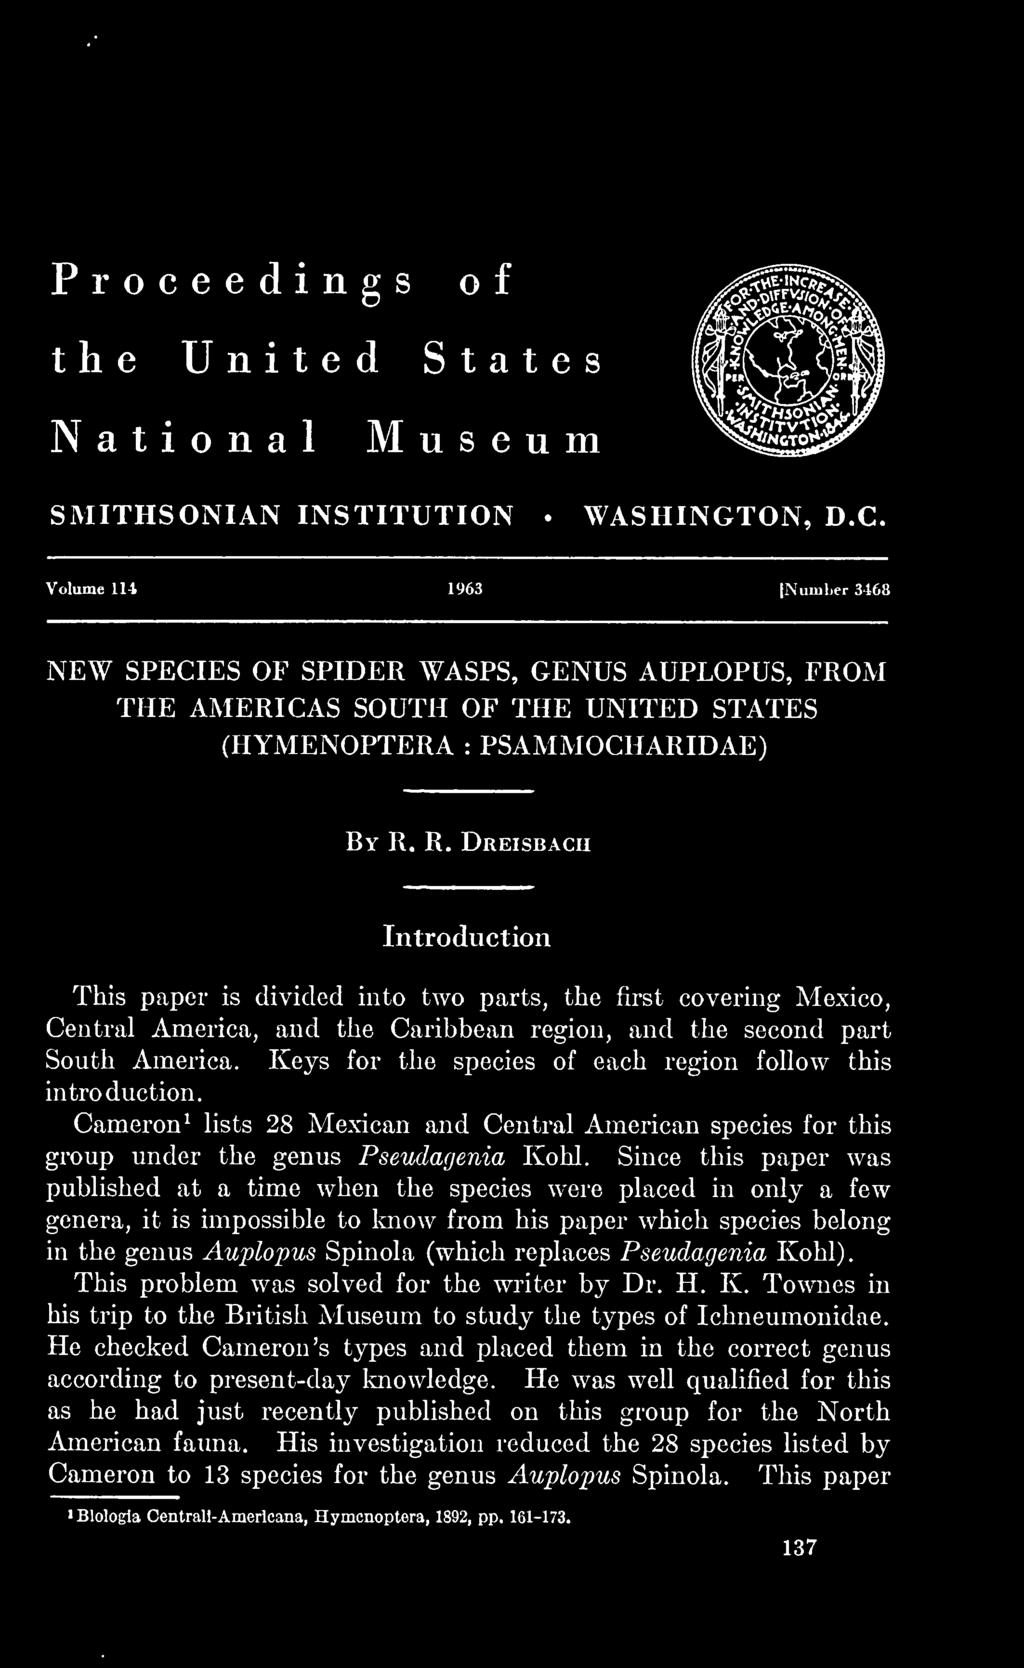 R. Dreisbach Introduction This paper is divided into two parts, the first covering Mexico, Central America, and the Caribbean region, and the second part South America.